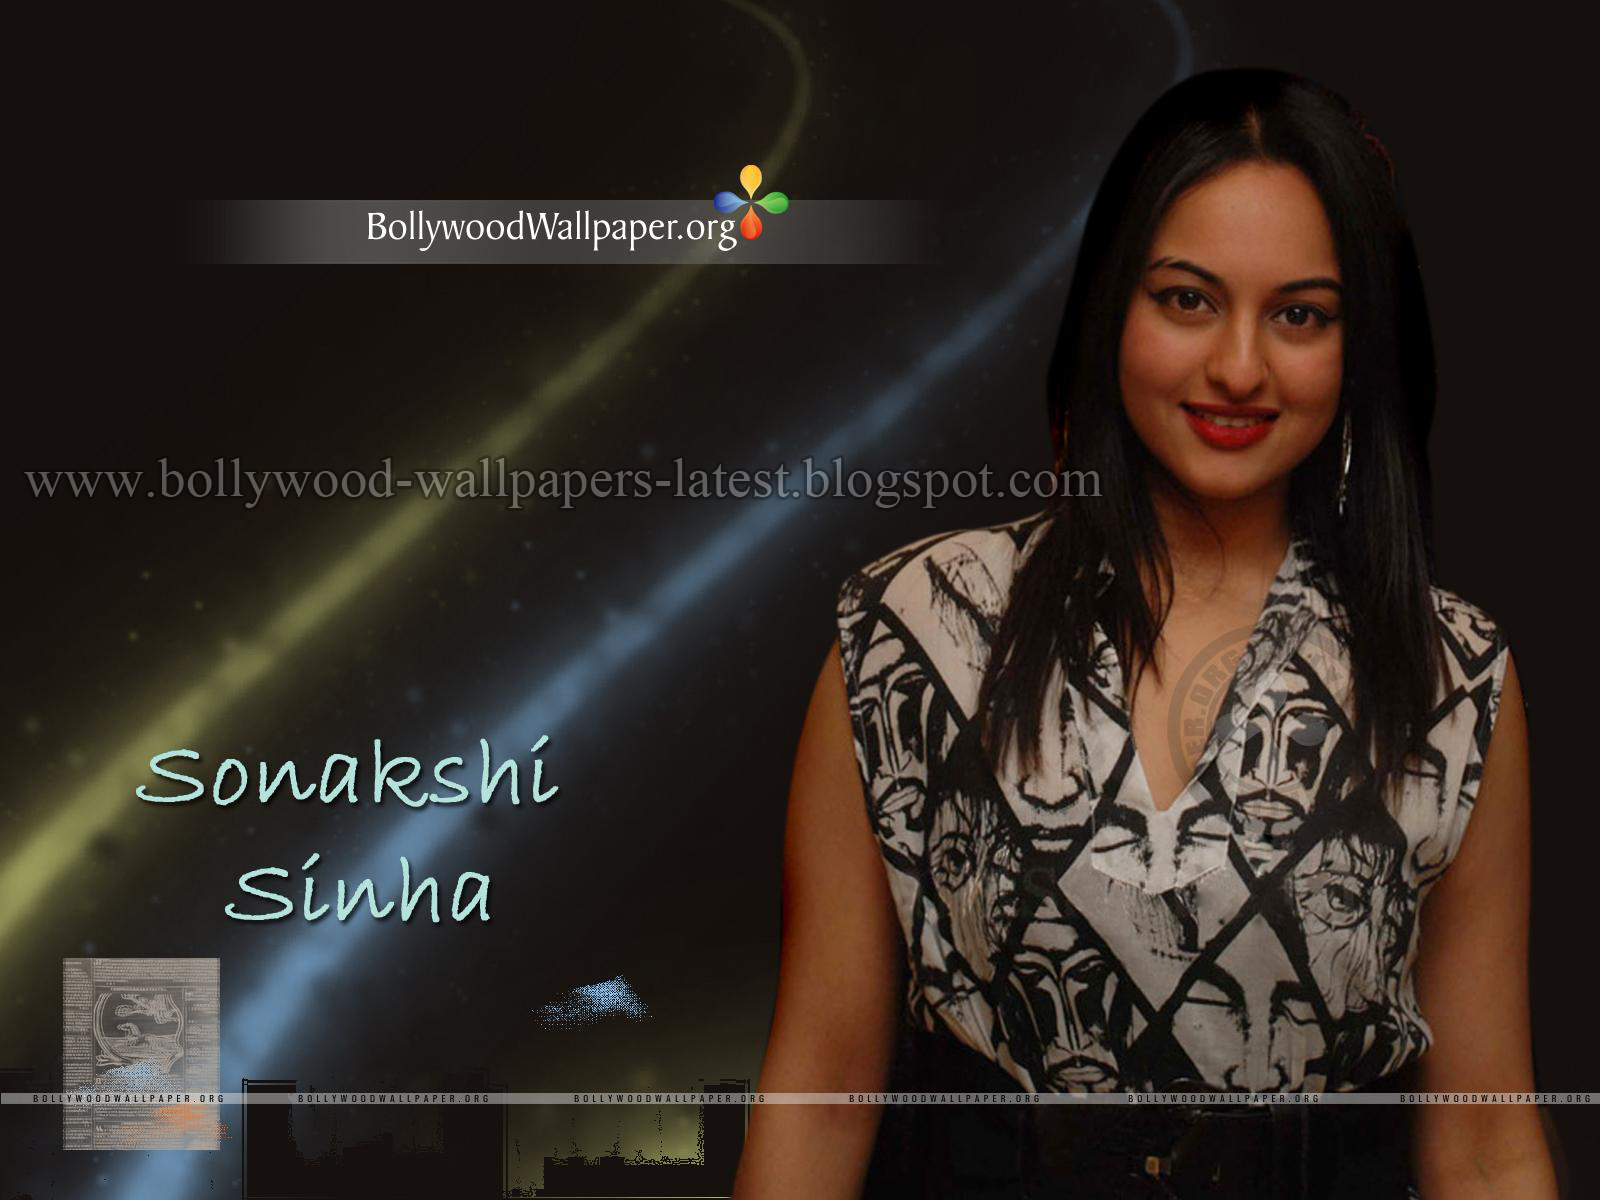 ... Wallpapers, Sonakshi Sinha Wallpapers From bollywood-wallpapers-latest